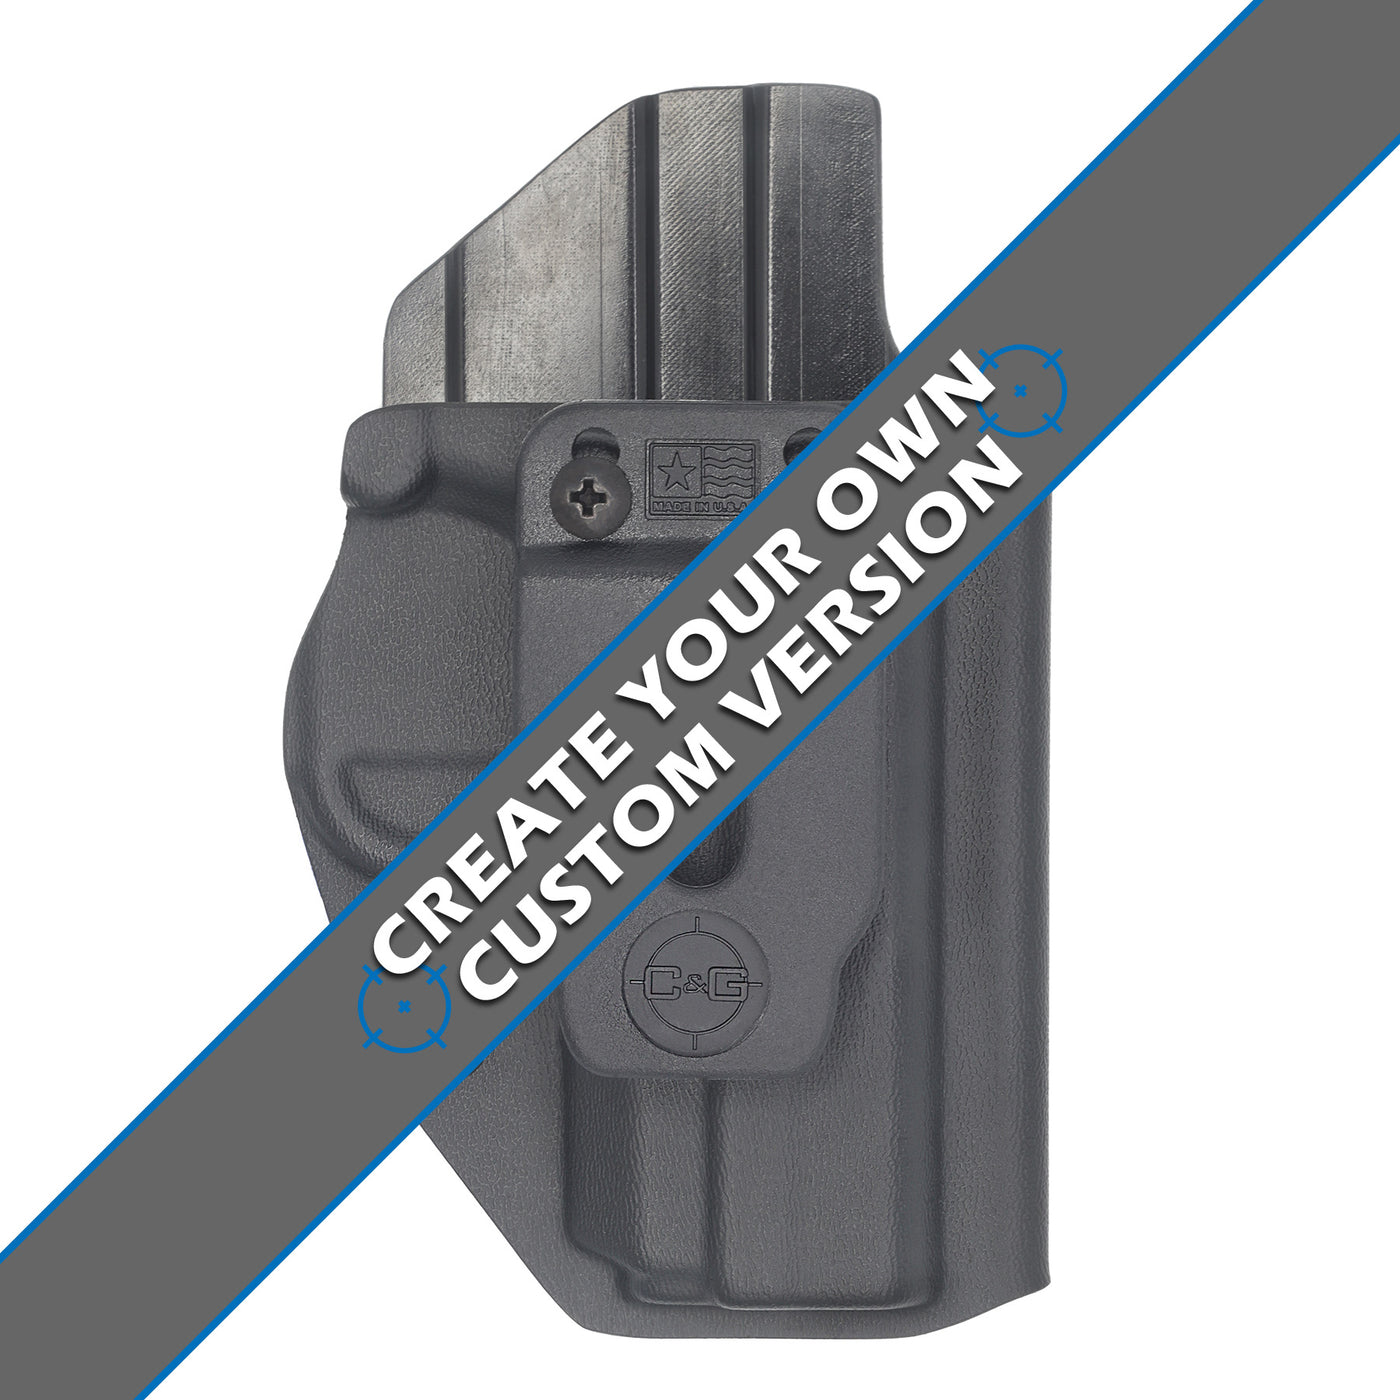 The C&G Holsters custom Covert IWB kydex holster for Smith & Wesson M&P Shield 45